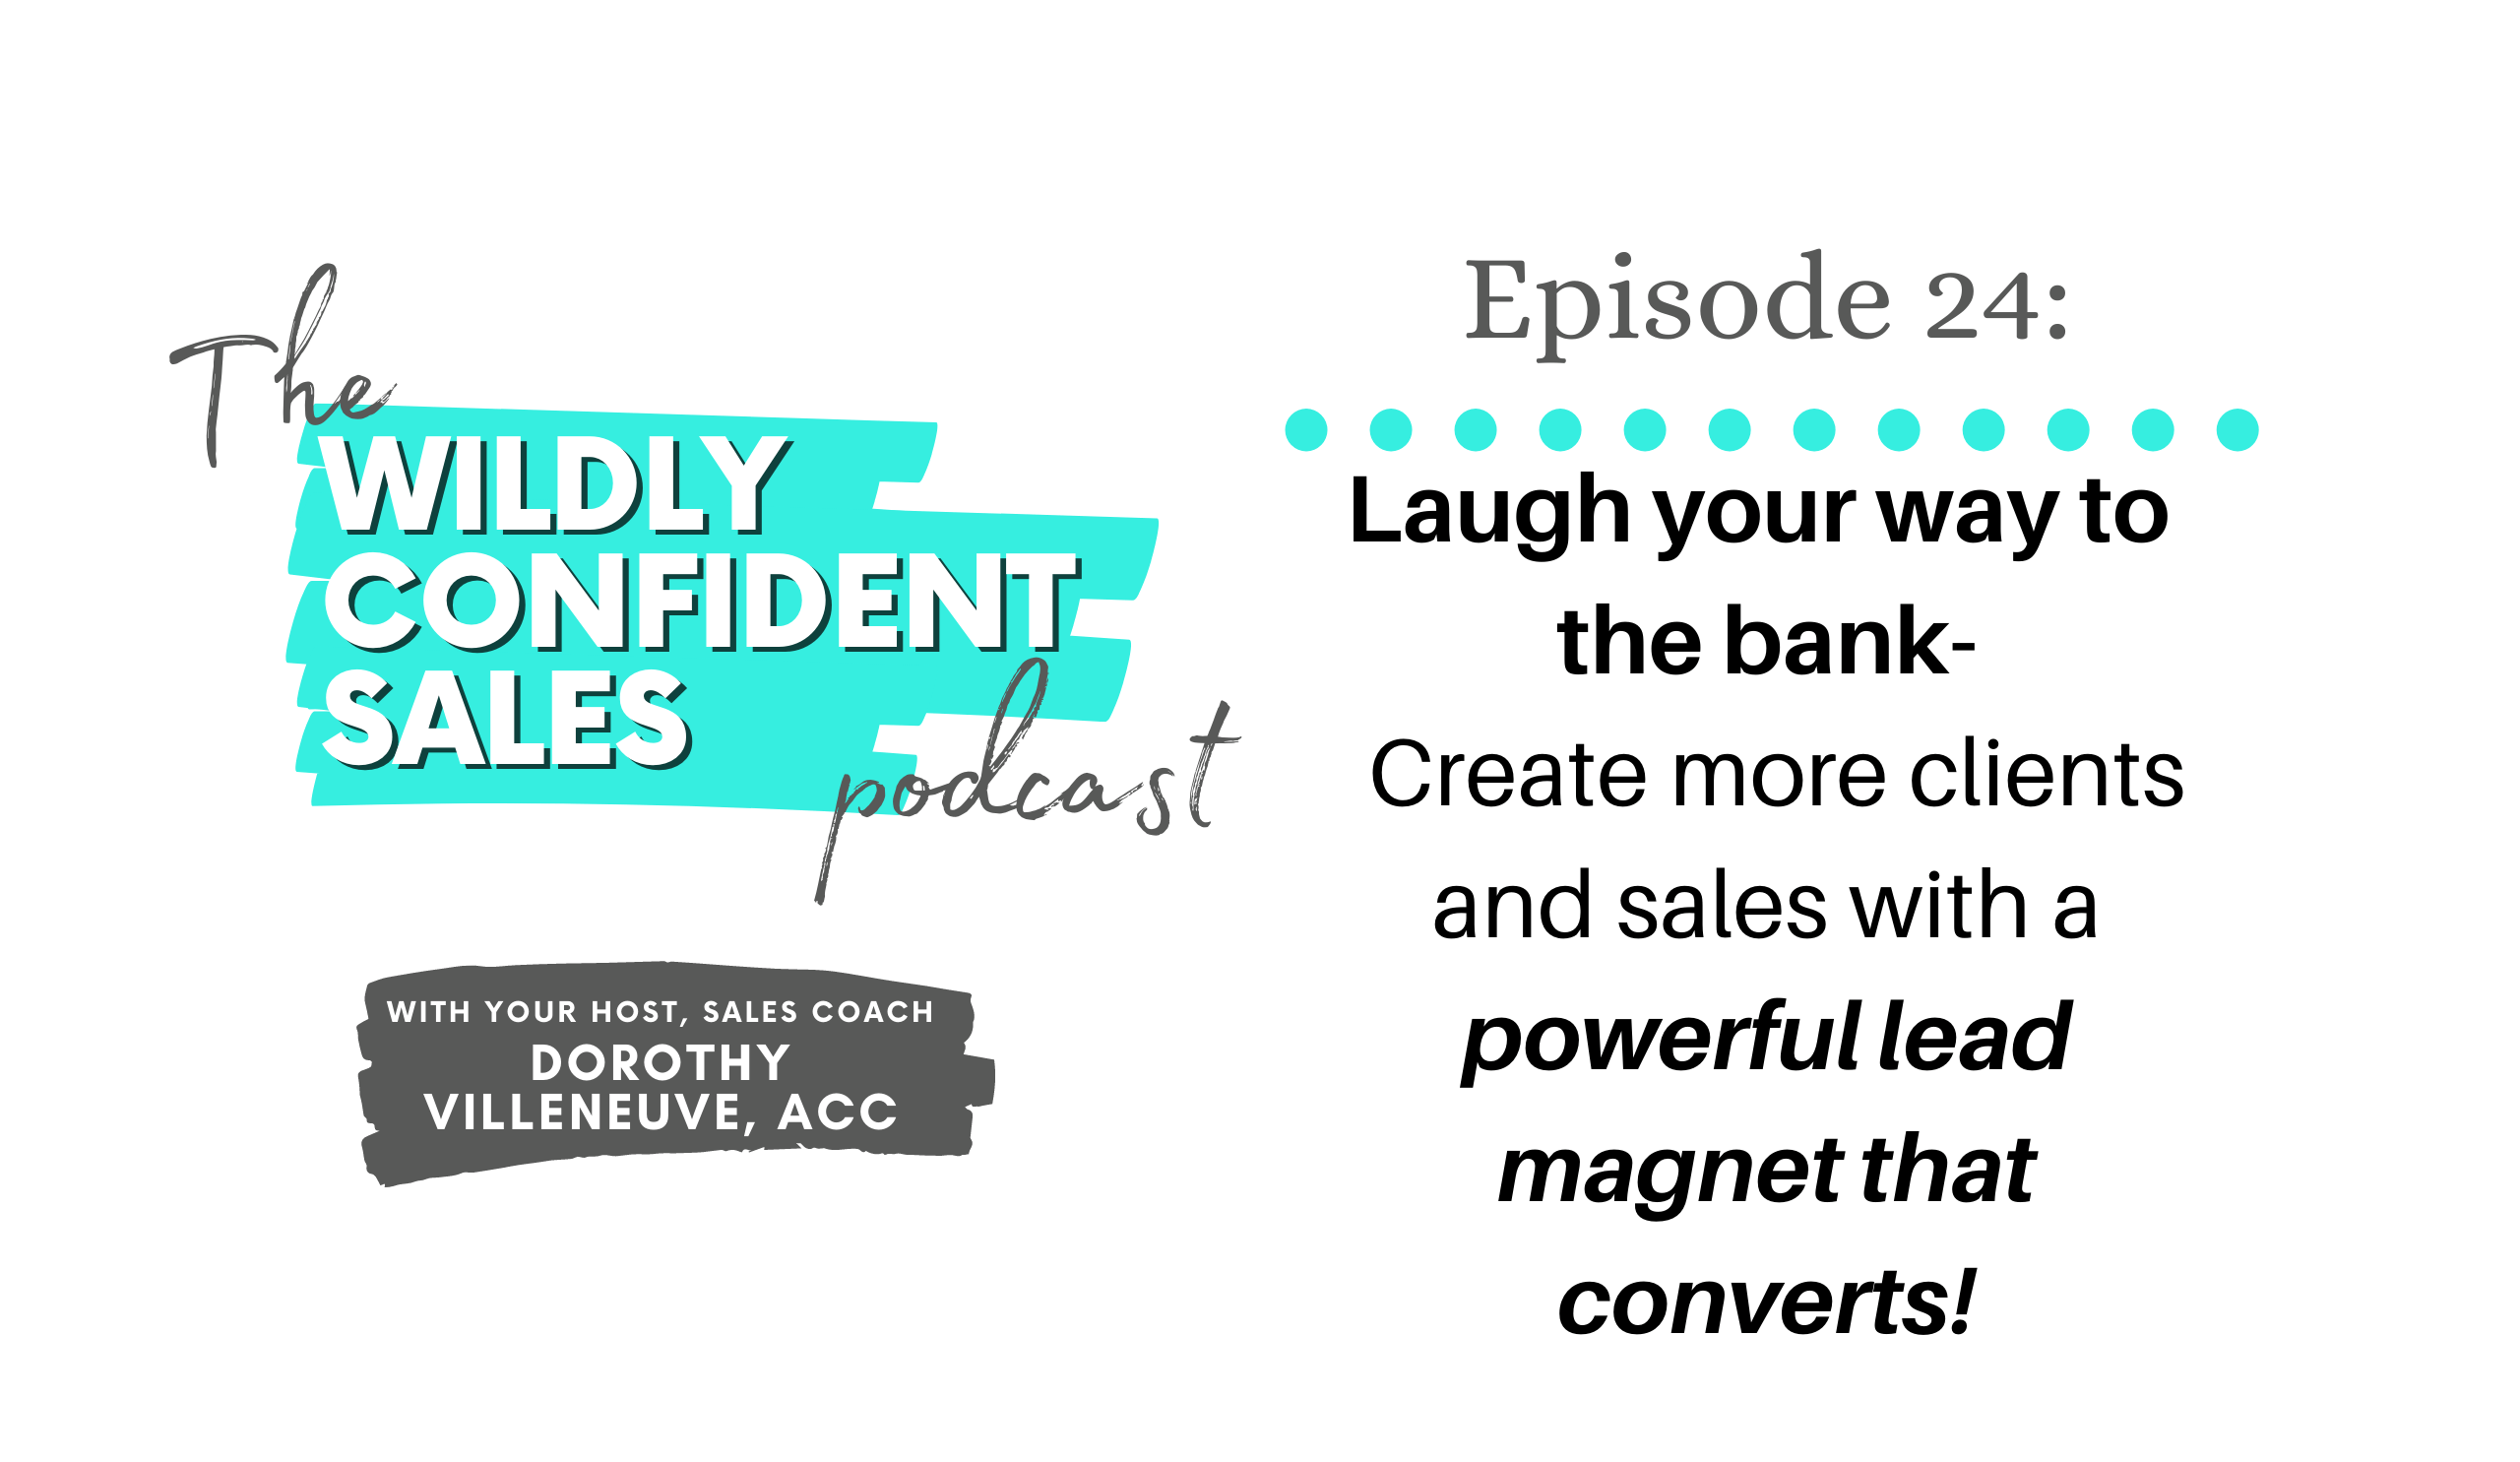 Laugh Your Way to the Bank - Create More Clients and Sales with a Powerful Lead Magnet that Converts